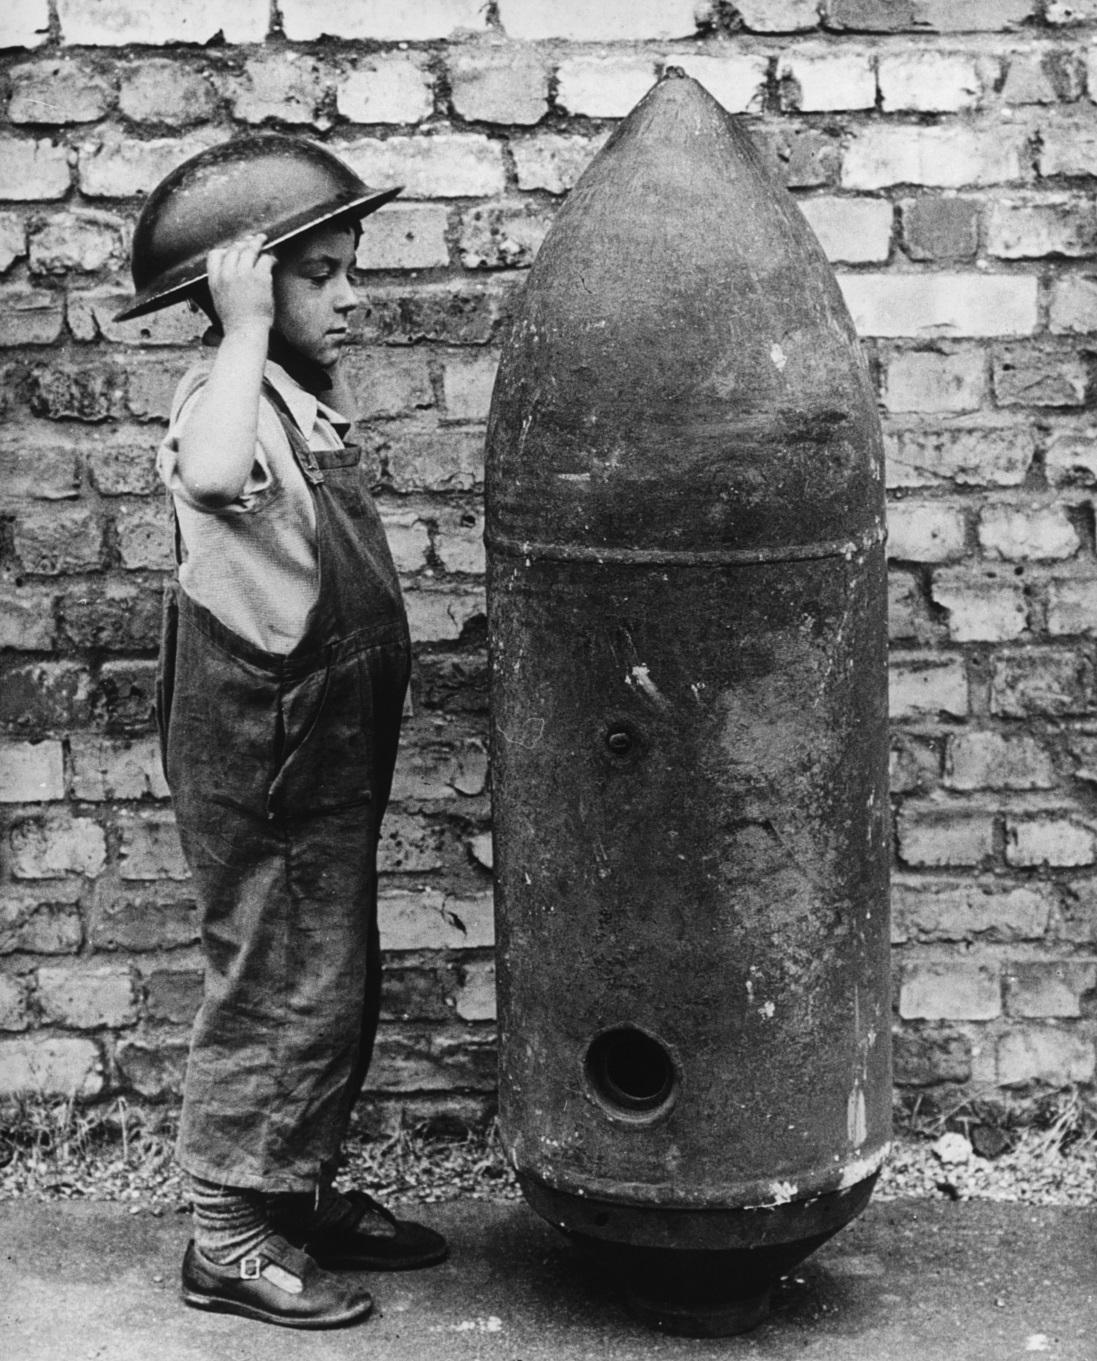 Unexploded bomb that fell on the Gaumont in Wood Green in 1940